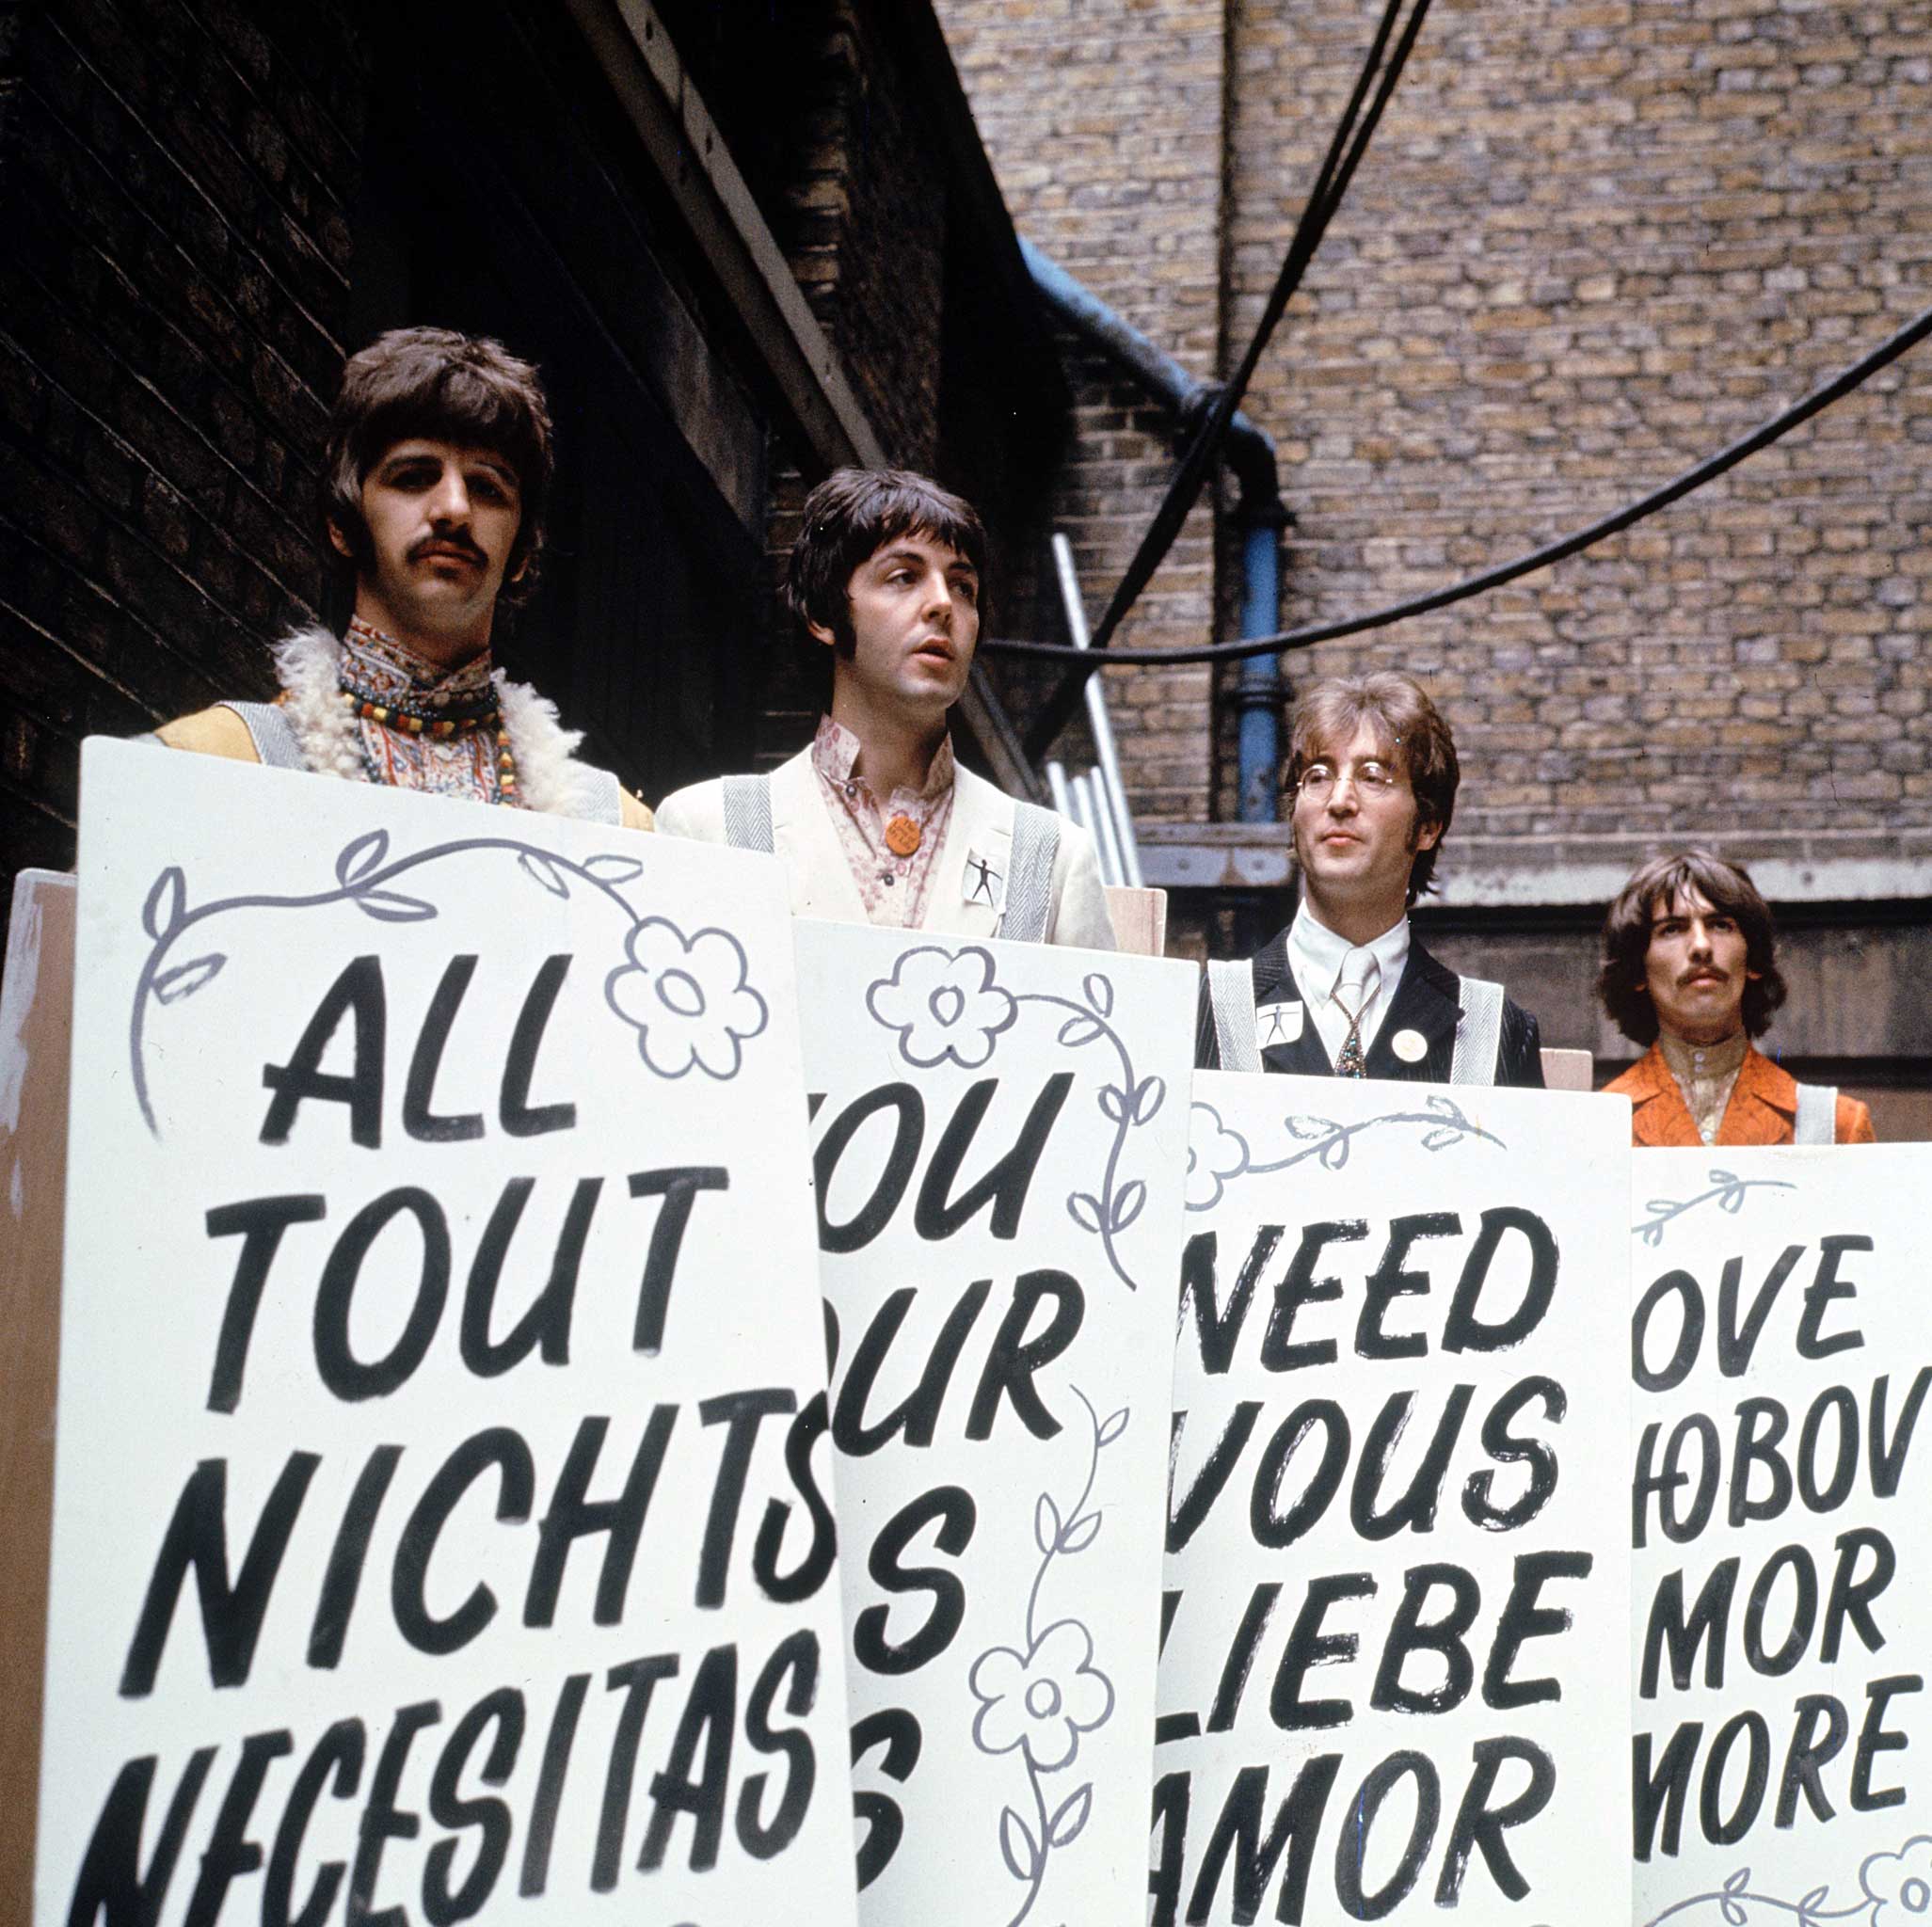 Second worst Beatles song: All You Need is Love is tautological